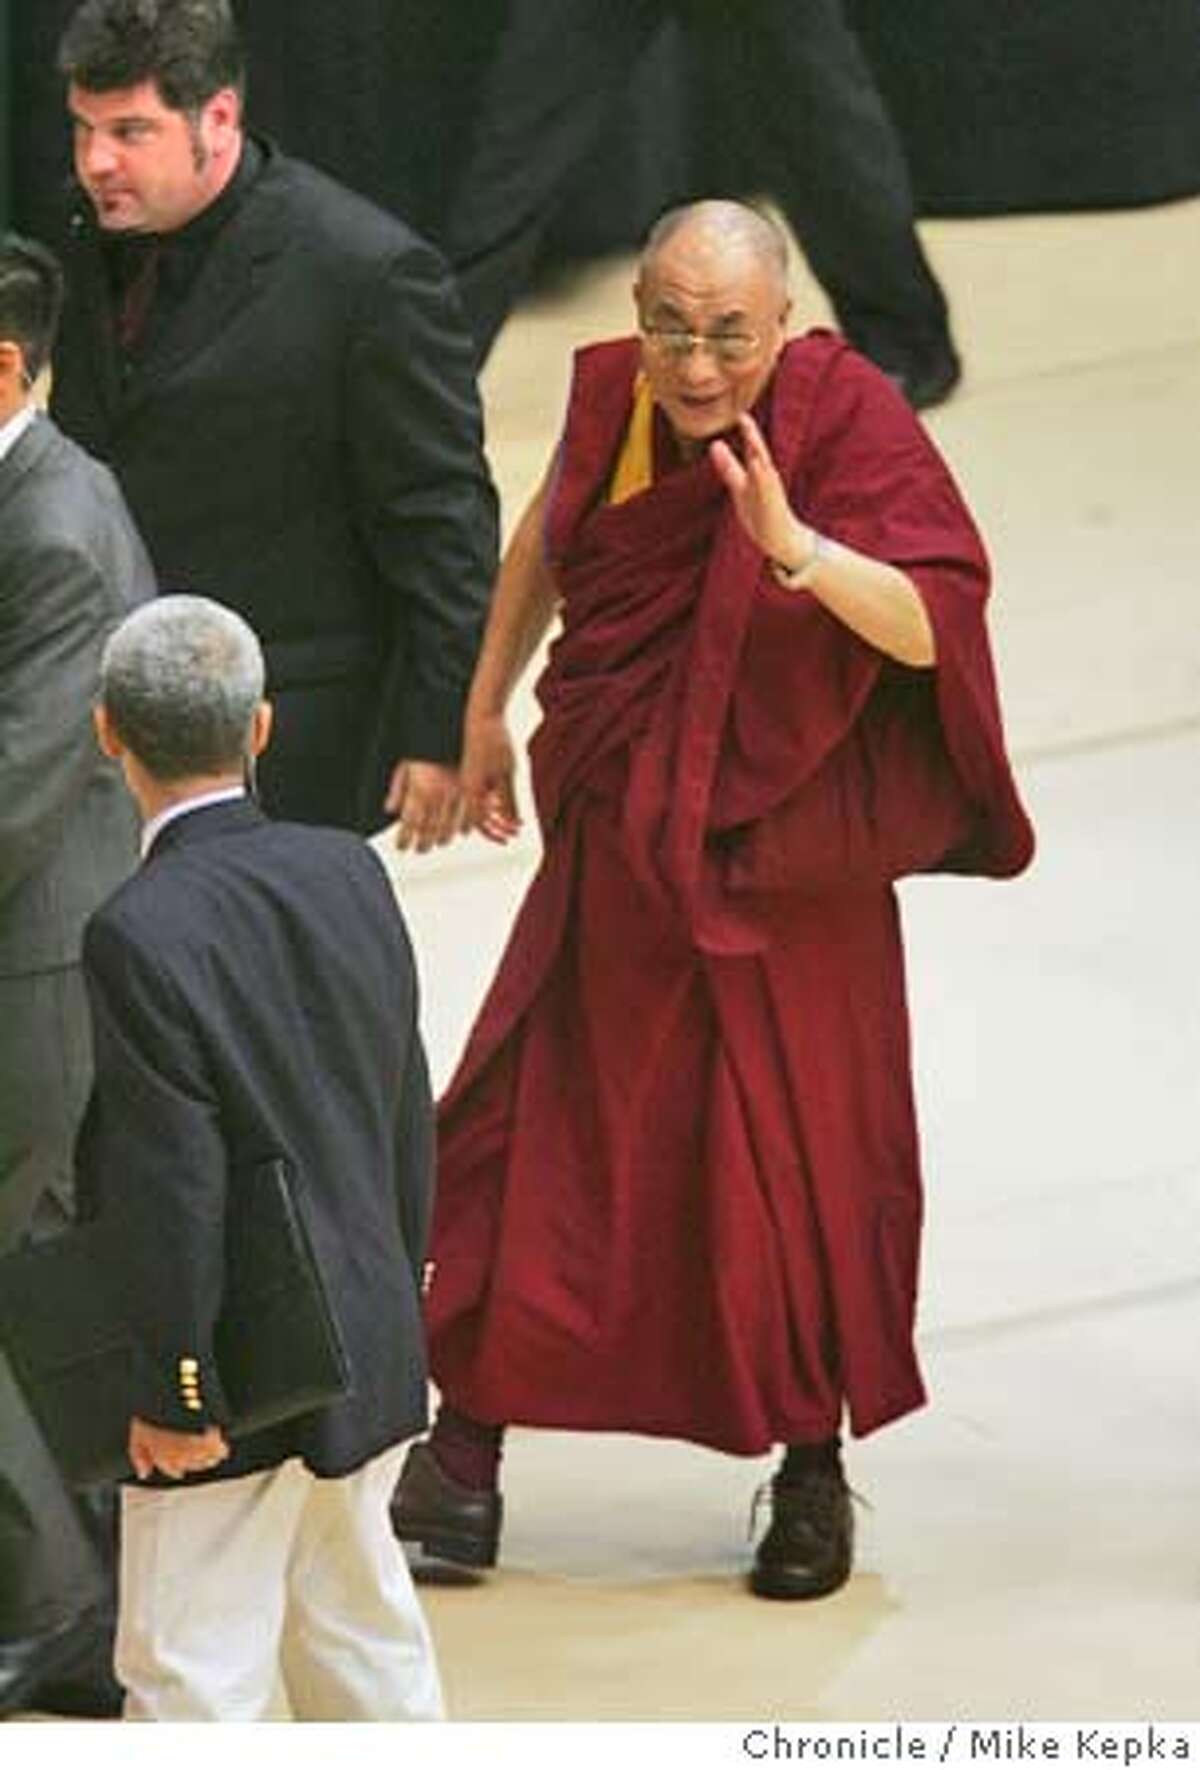 dalaiLama274_mk.JPG The Dalai Lama waves goodbye after his Friday lecture at Stanford. The Dalai Lama visited the Stanford Campus Friday where he led a two hour discussion at the Maples Pavilion on the topic of meditation and spiritual balance and awarness. date} Mike Kepka / The Chronicle MANDATORY CREDIT FOR PHOTOG AND SF CHRONICLE/ -MAGS OUT